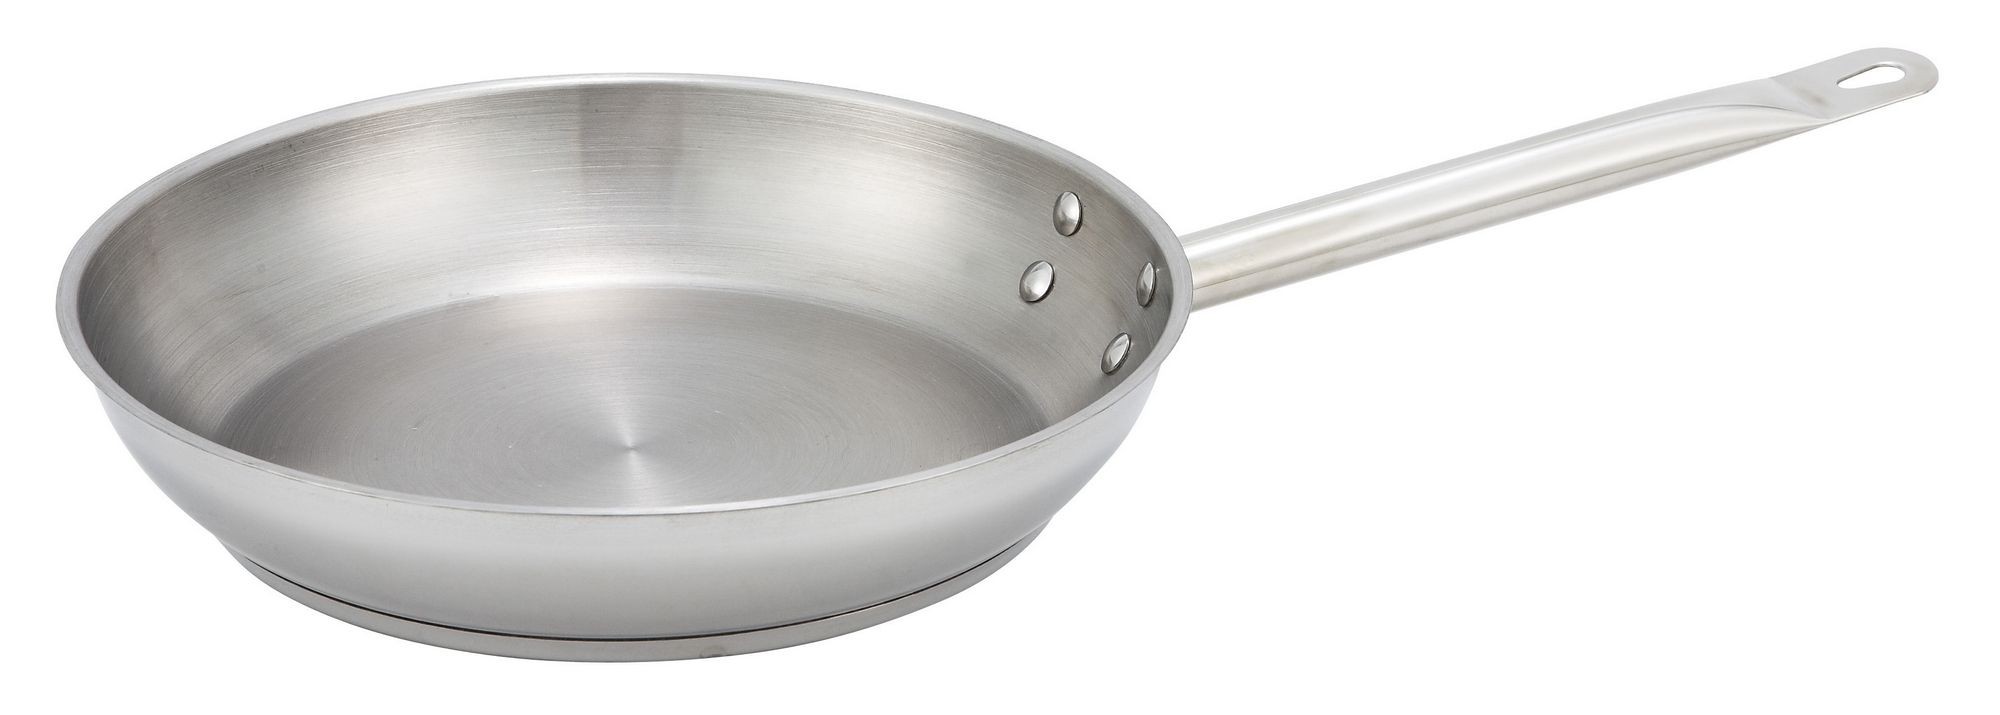 Winco SSFP-8 Stainless Steel Induction Fry Pan 8"